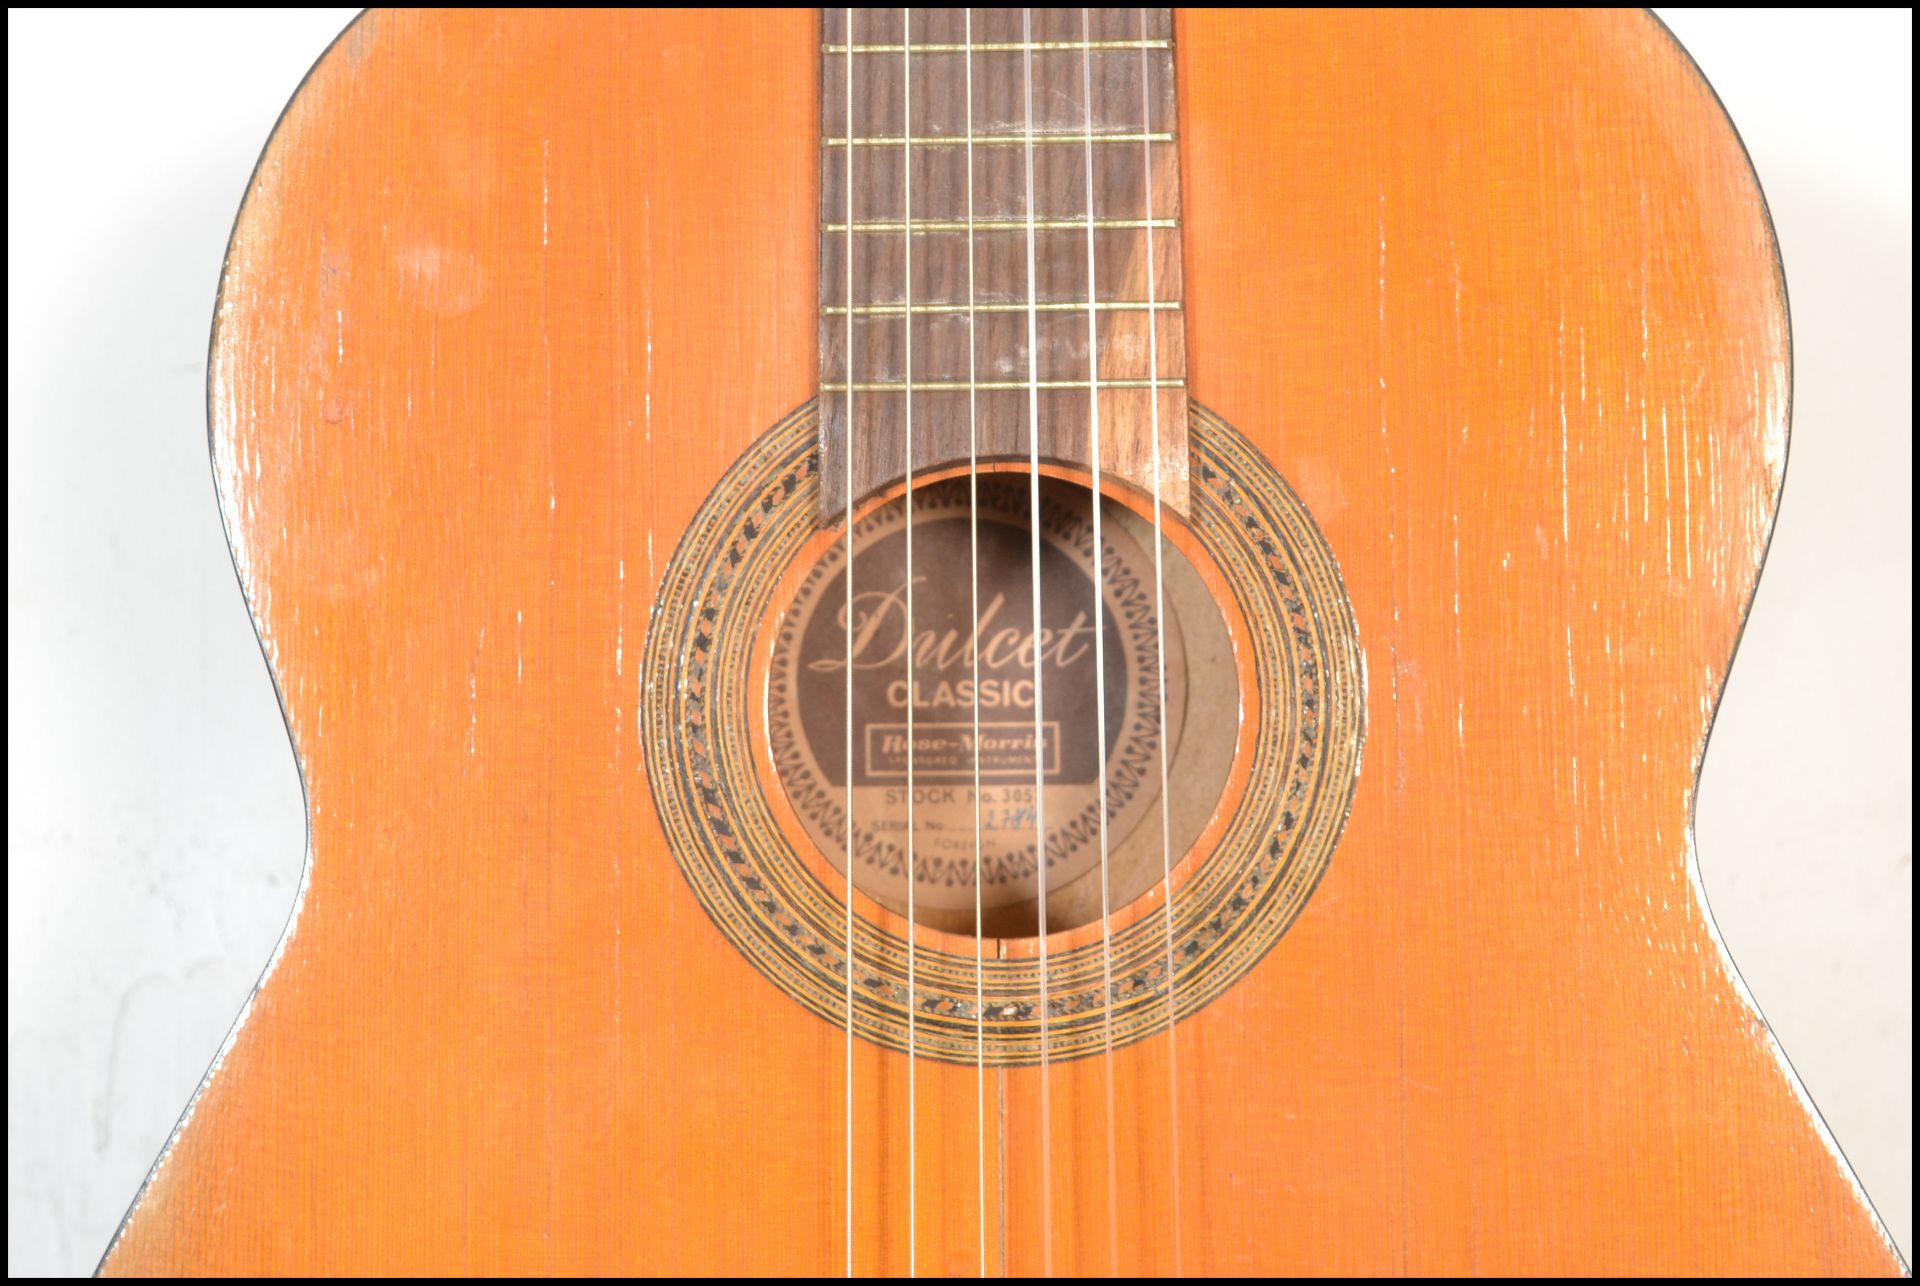 A vintage Dulcet classic six string acoustic guitar model 3057 having a shaped hollow body with - Bild 3 aus 8